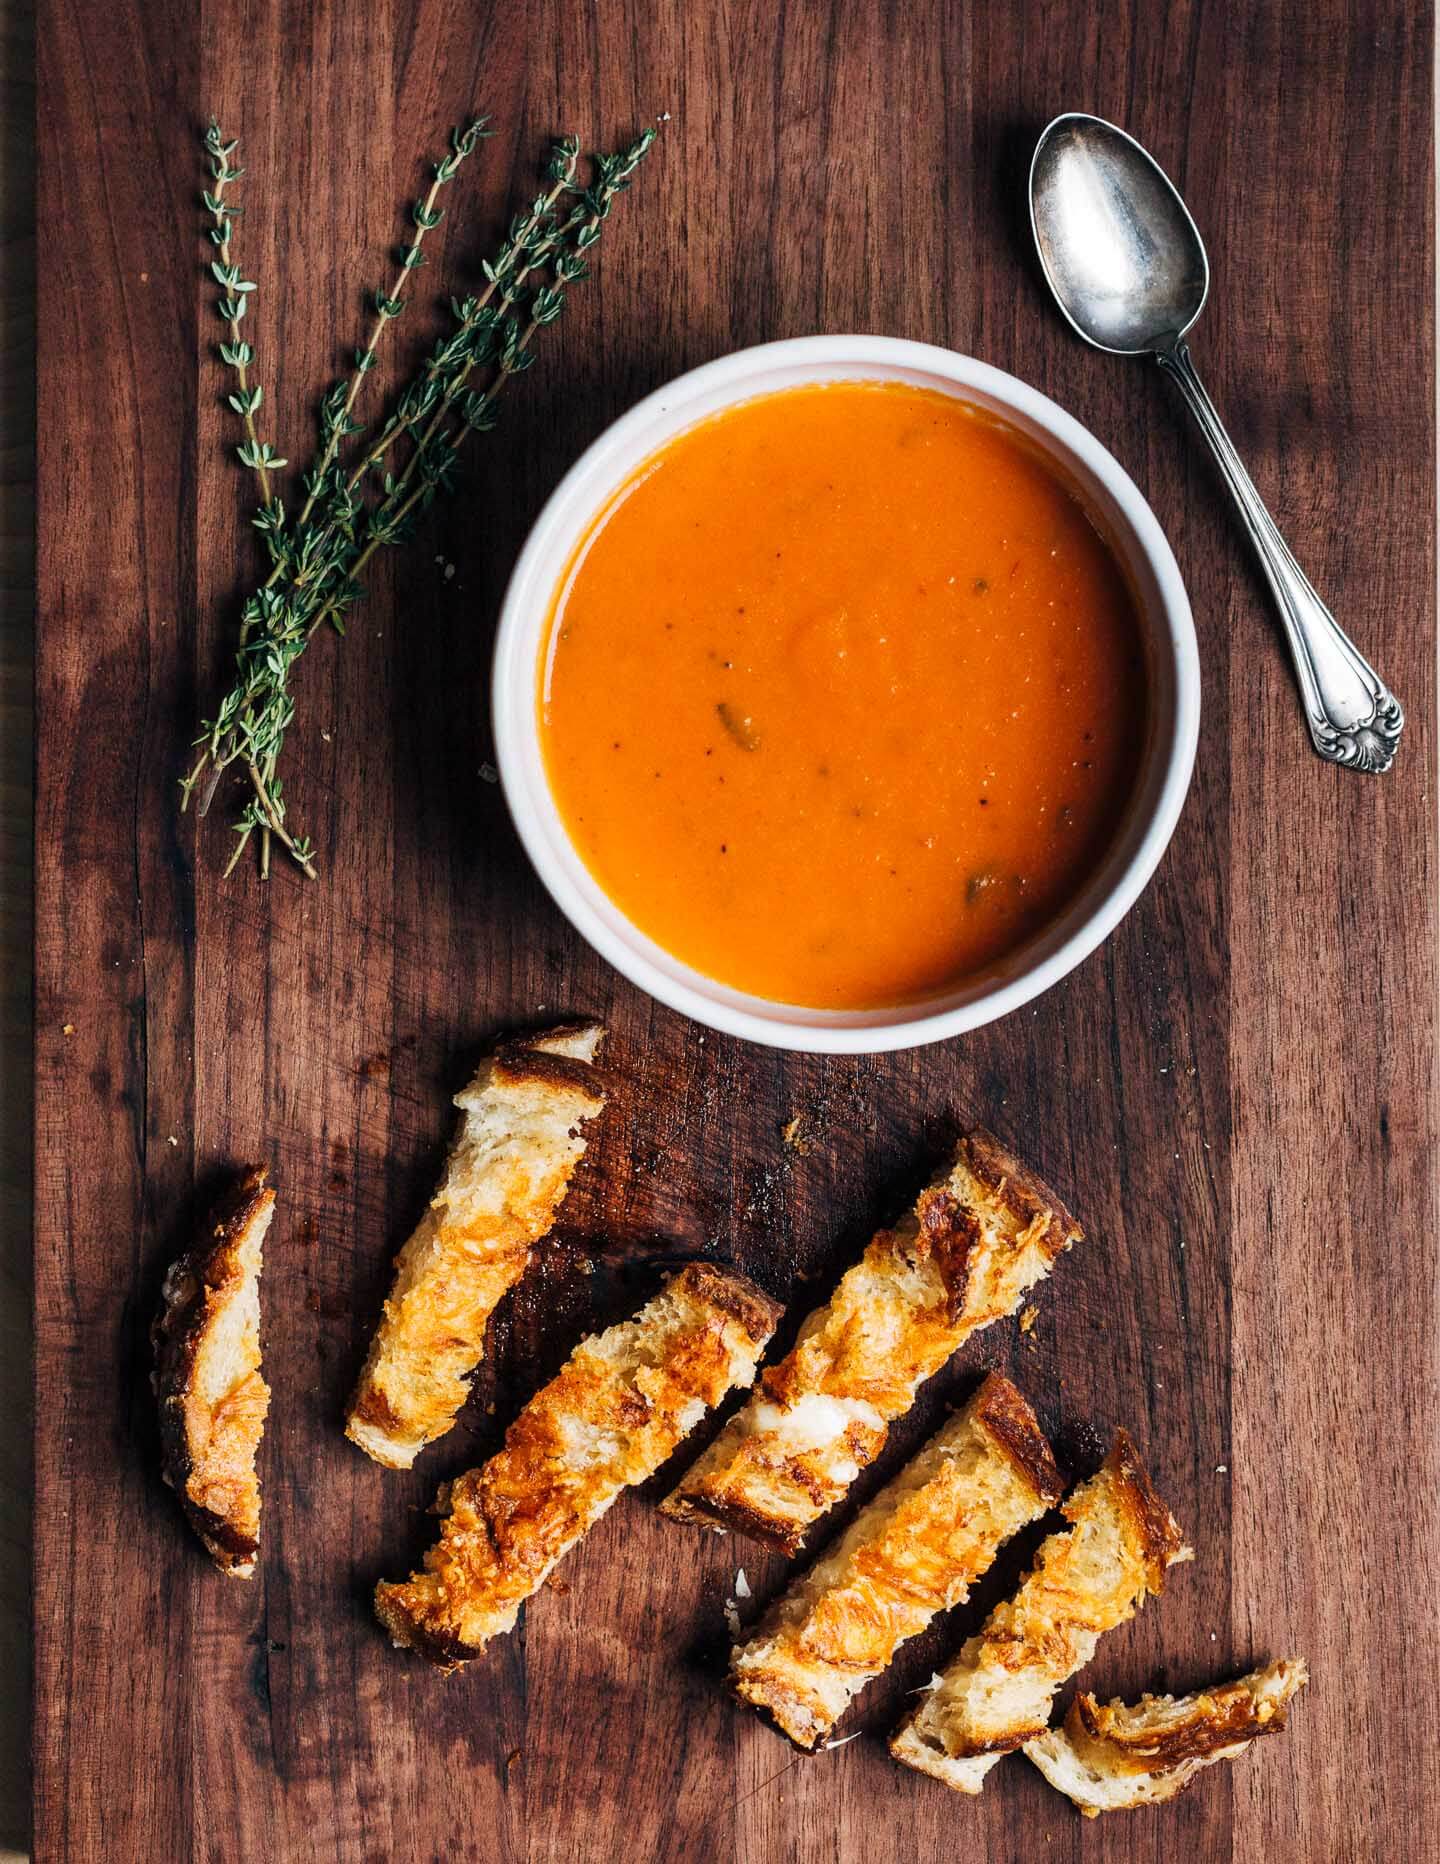 A bowl of soup and sliced grilled cheese on a cutting board.